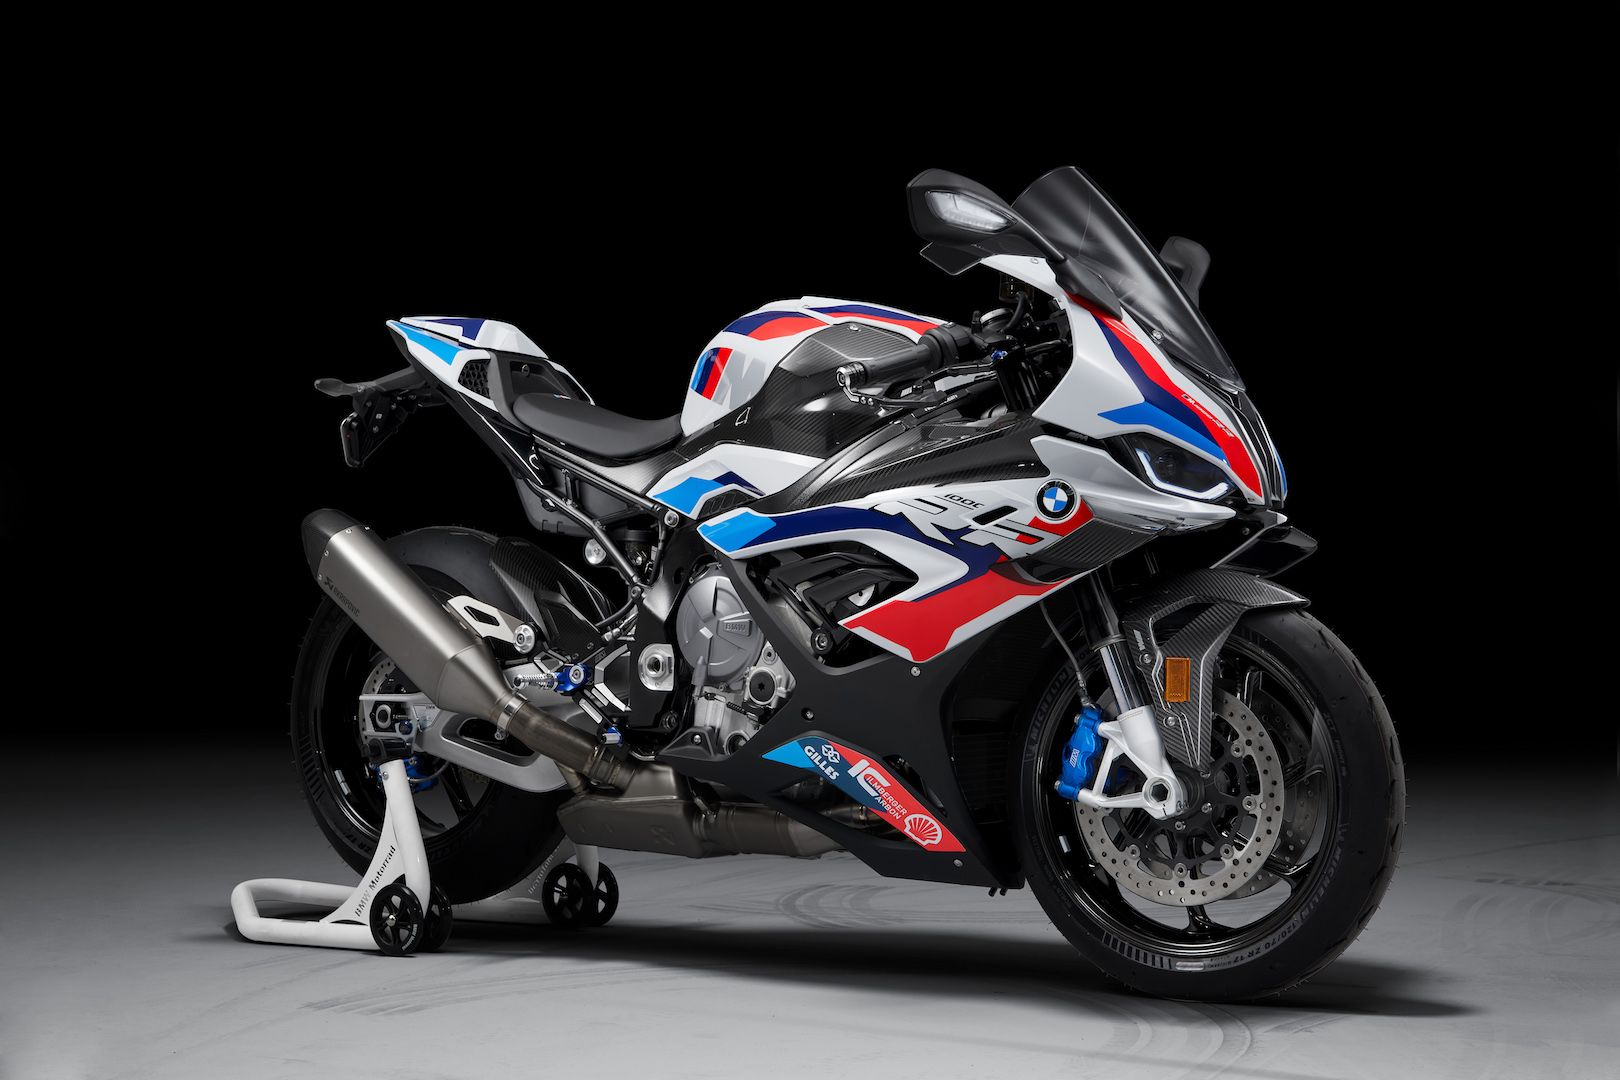 BMW M1000RR Revealed. The first M Motorcycle